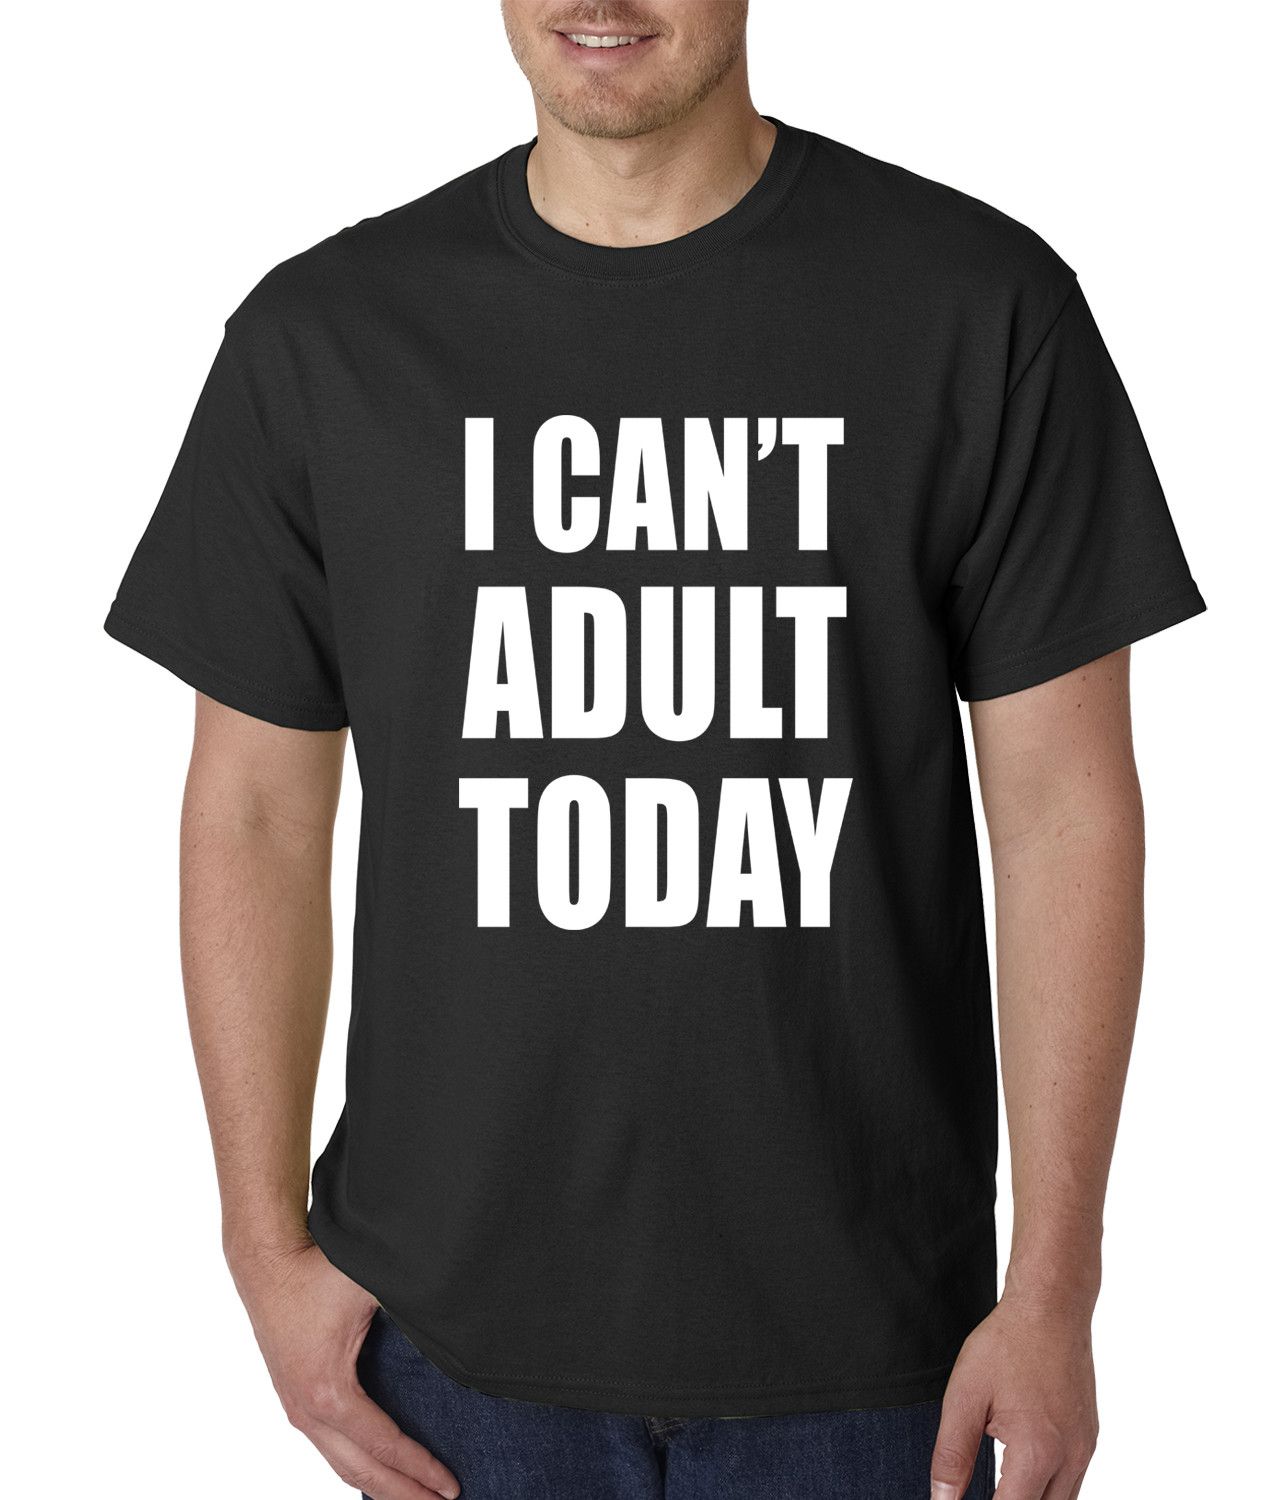 I CAN'T ADULT TODAY T-shirt Design man